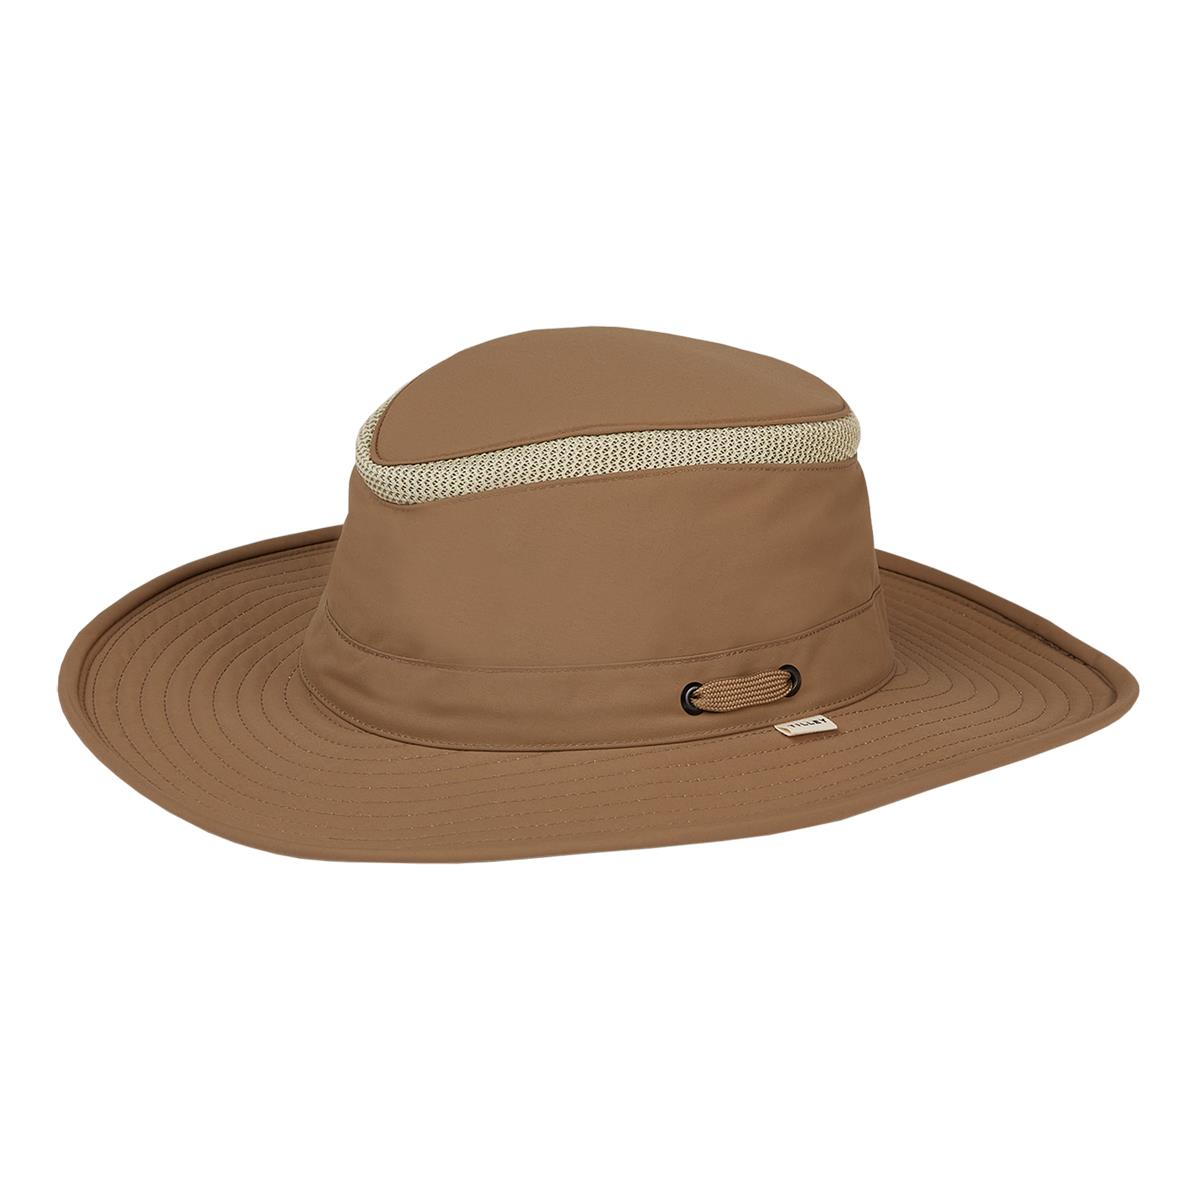 What colors and sizes does the Tilley Airflo Hat come in?